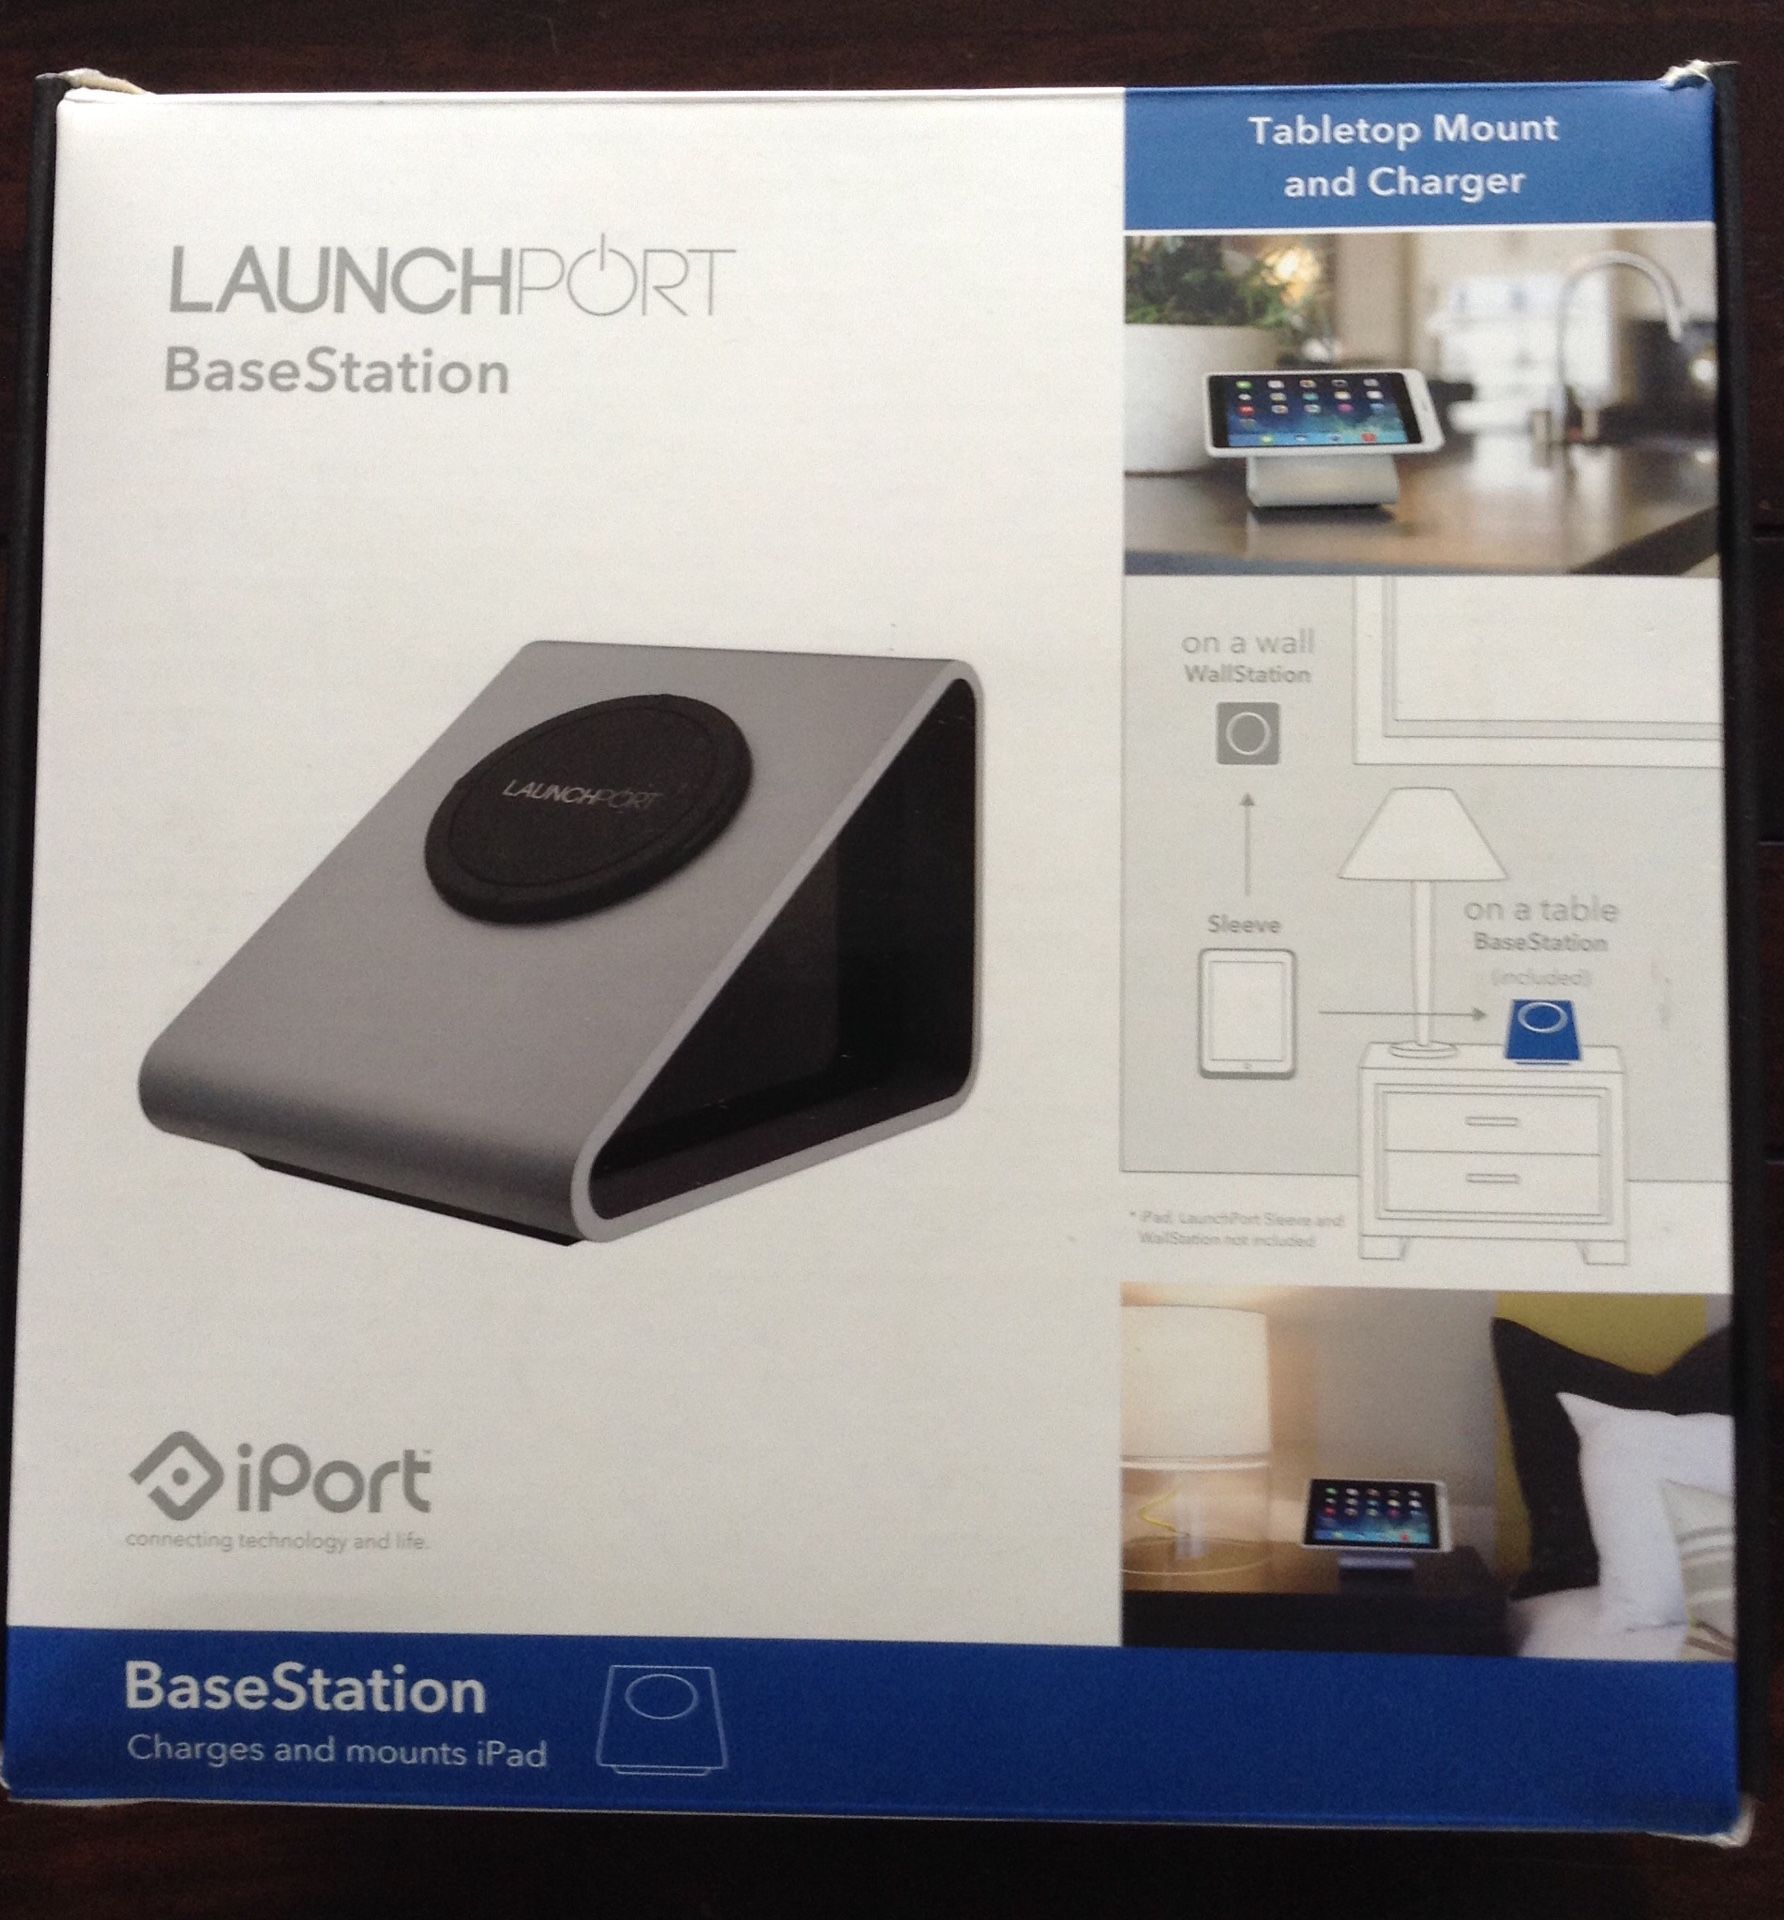 LaunchPort BaseStation by iPort for iPad